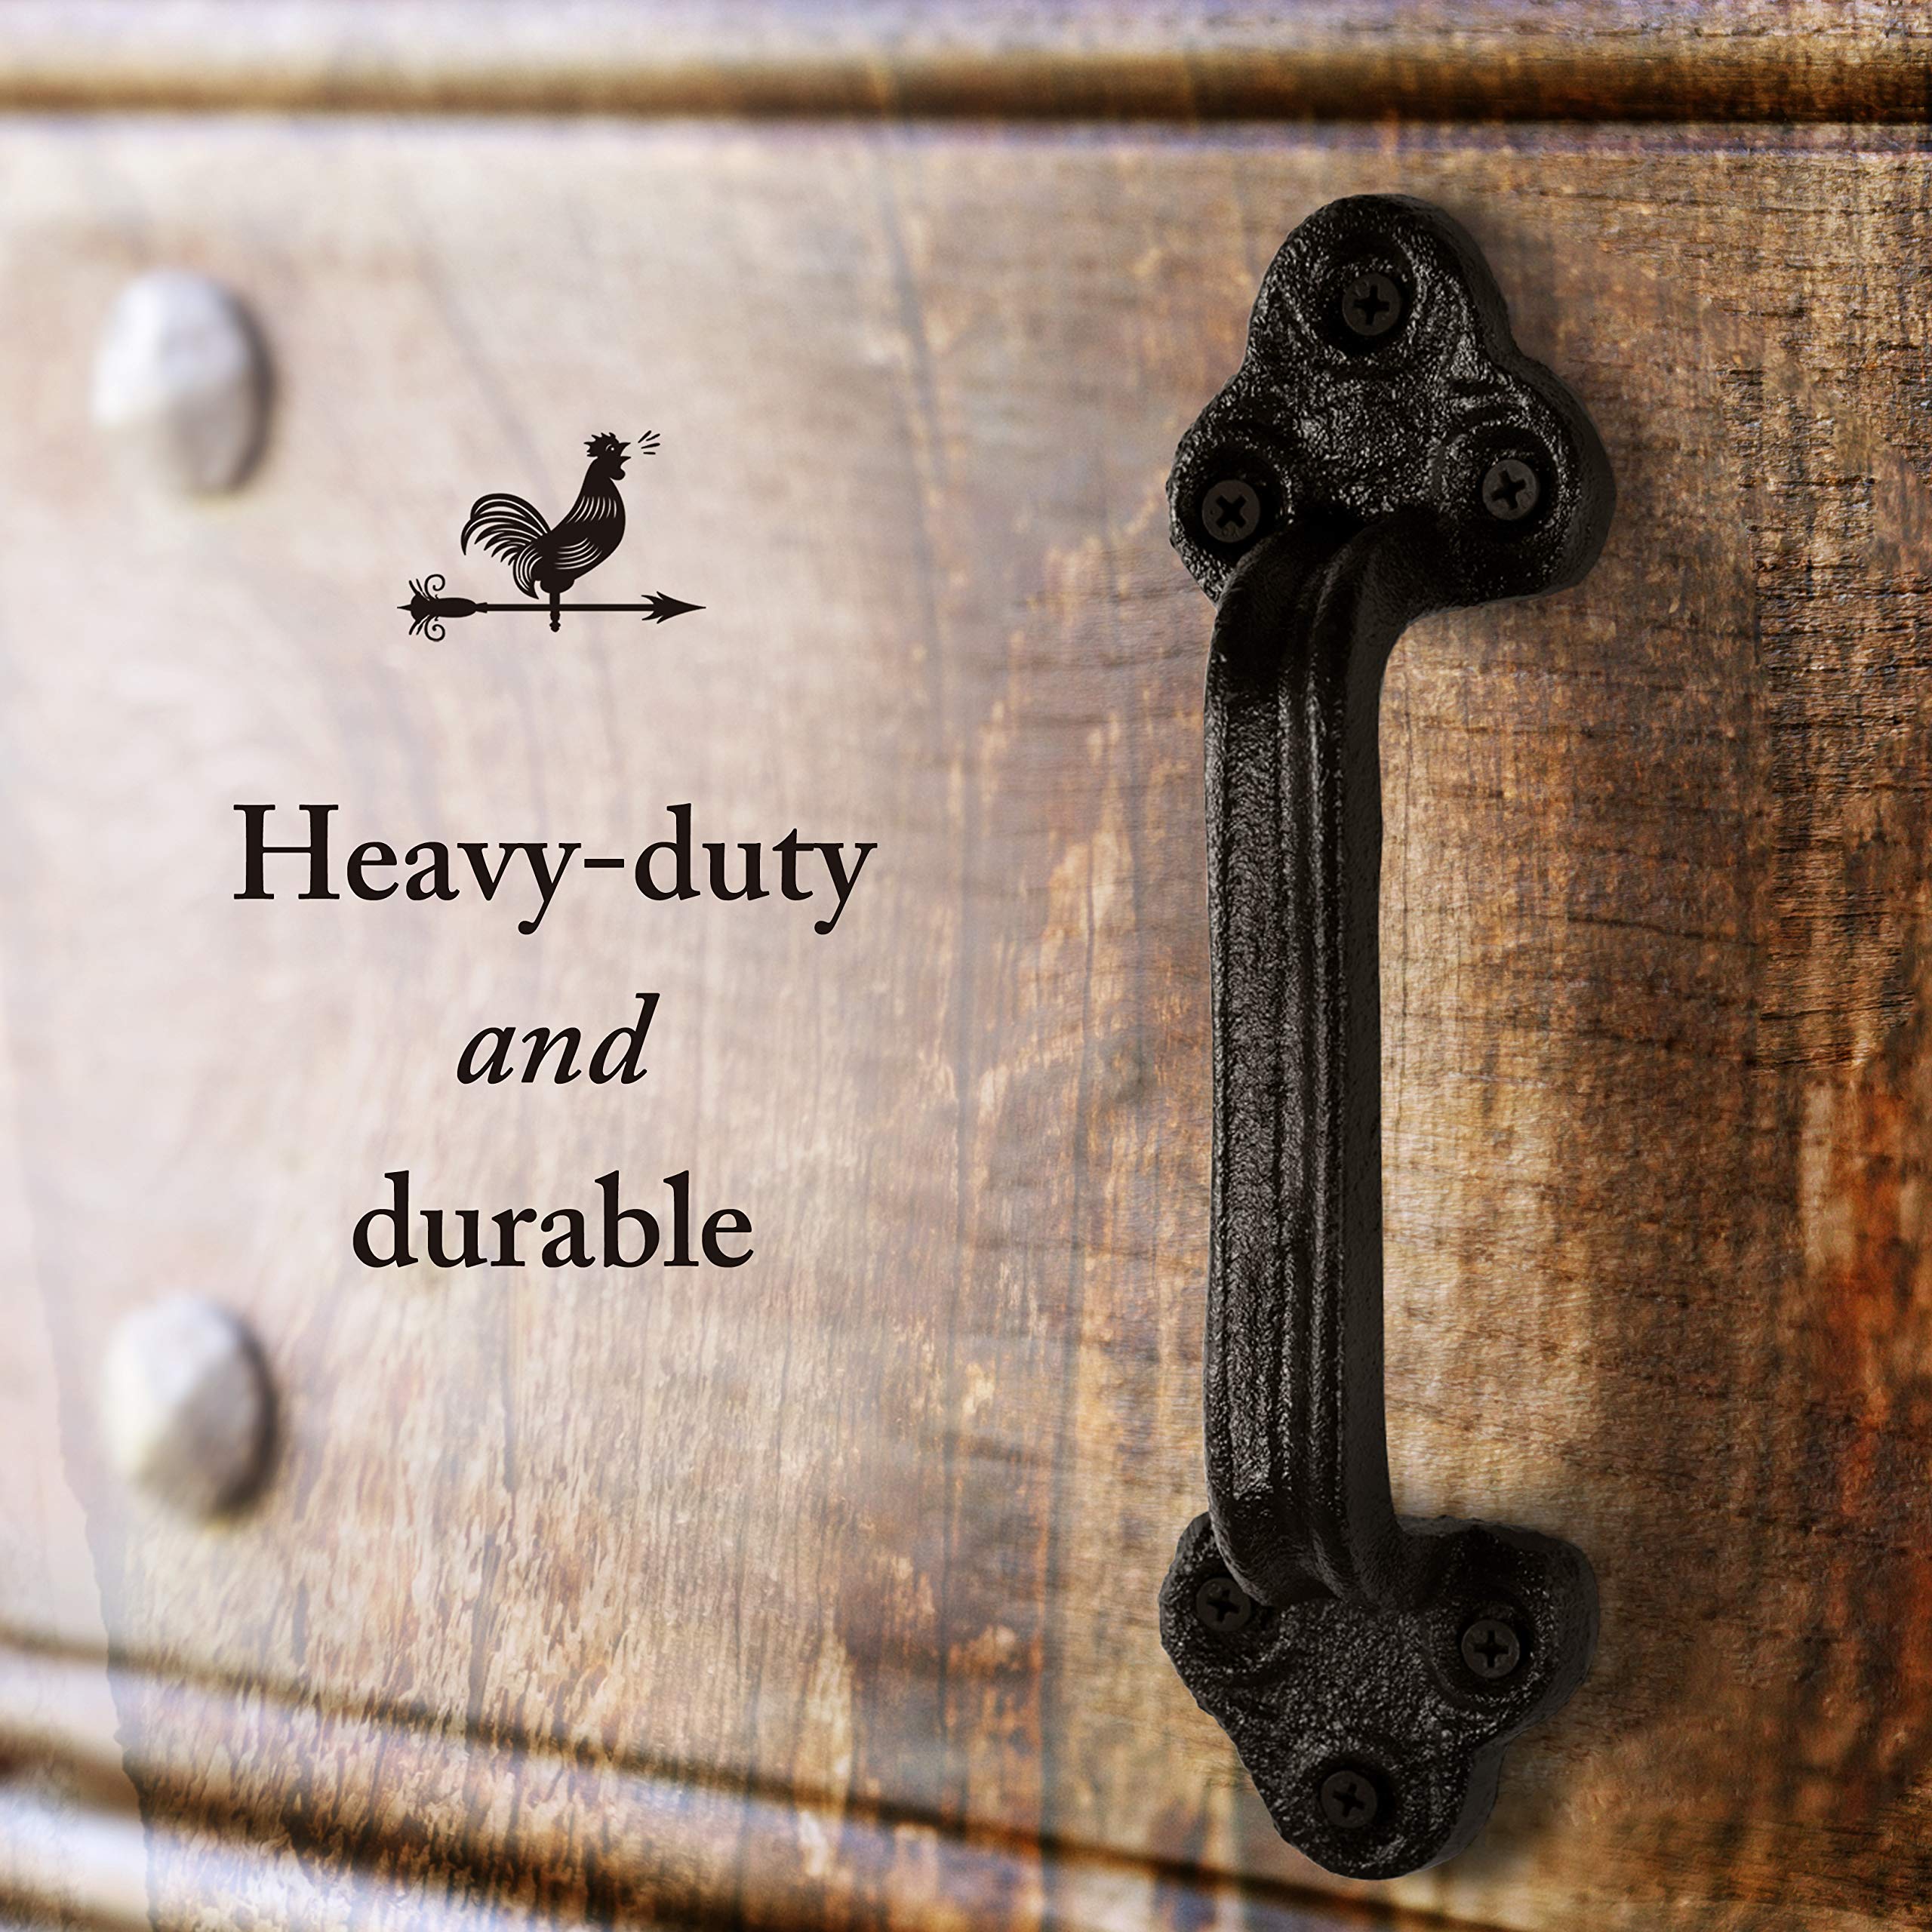 Heavy Duty Barn Door Handles (Set of 2) Black Rustic Cast Iron Gate Handles - Farmhouse Decor, Strong Closet Sliding Door Pull - with Hardware (Large - 9 inches, Indoor & Outdoor)